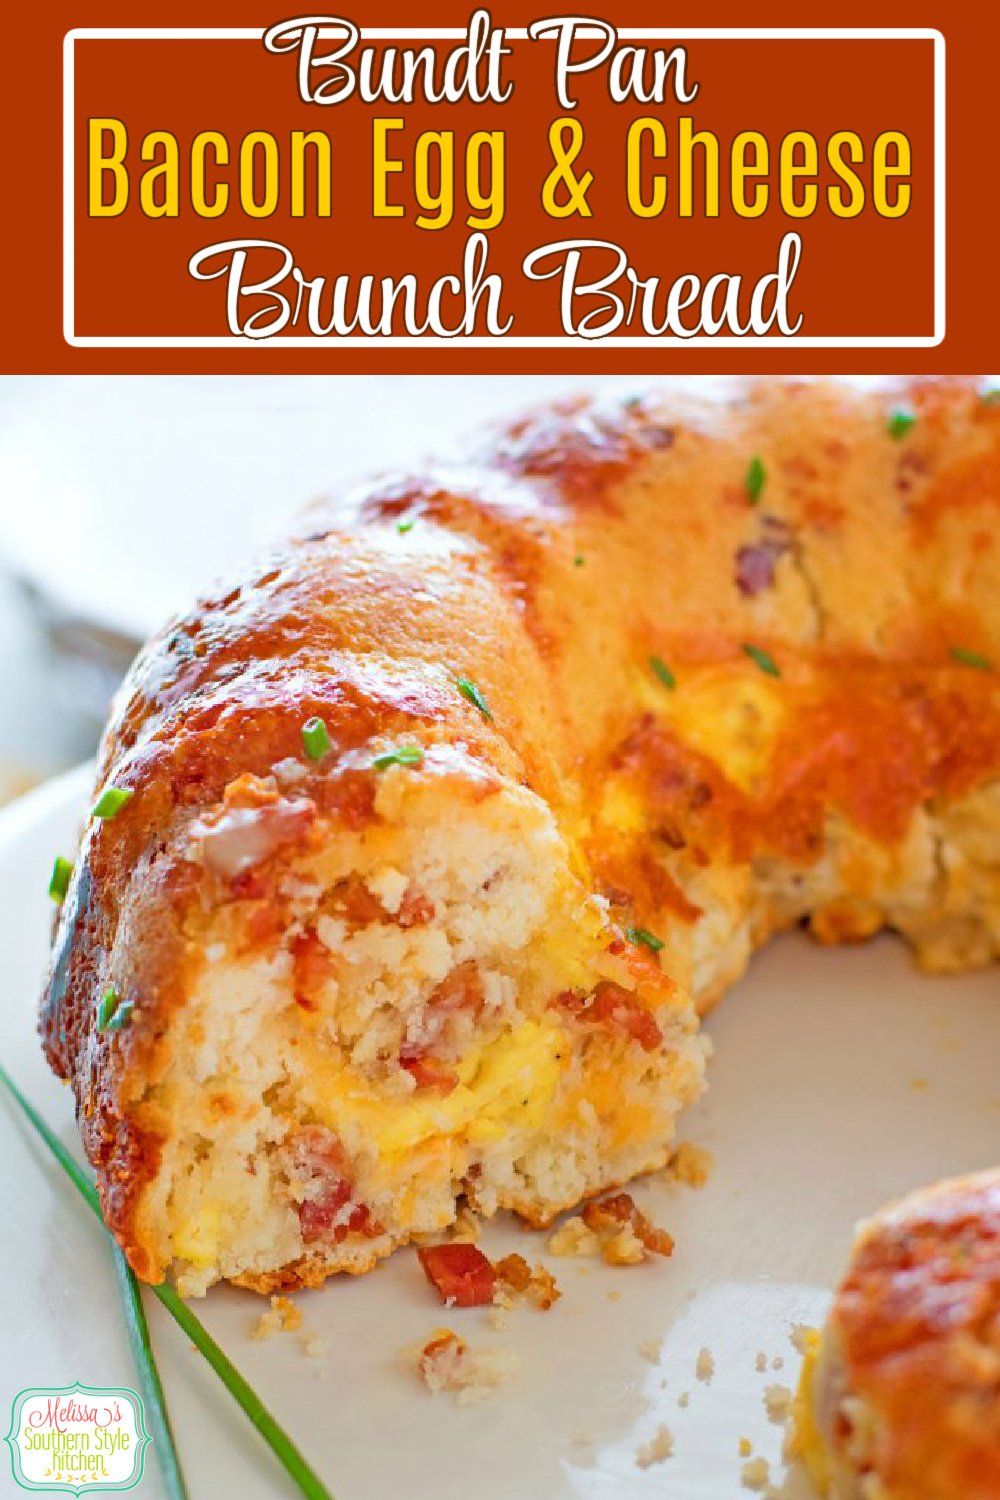 Bundt Pan Bacon Egg and Cheese Brunch Bread is a delicious start to ANY day #brunchbread #baconeggandcheese #cheesebread #bacon #bundtpan #buntpanbread #breadrecipes #biscuits #breakfast #eggs #southernfood #southernrecipes #holidaybrunch #holidayrecipes #buttermilkbiscuits